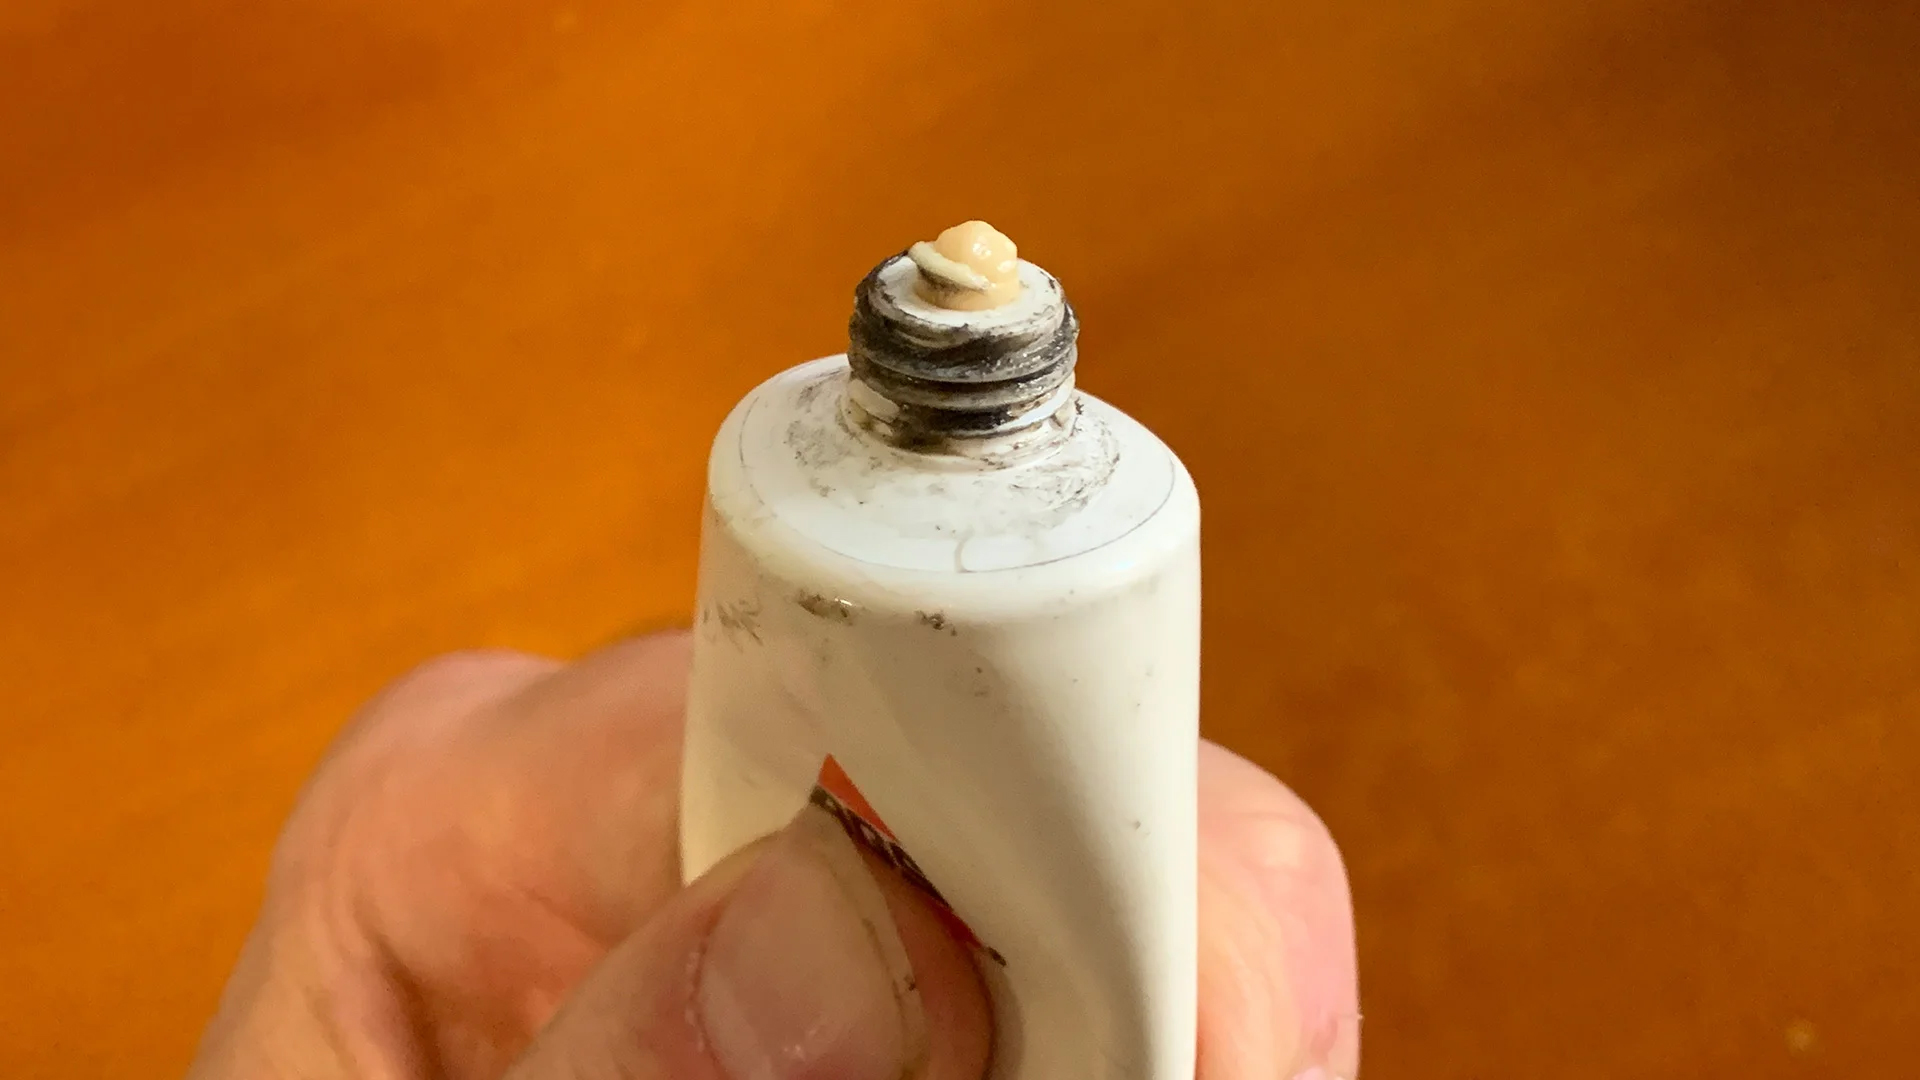 Lithium grease squeezed out of a tube.